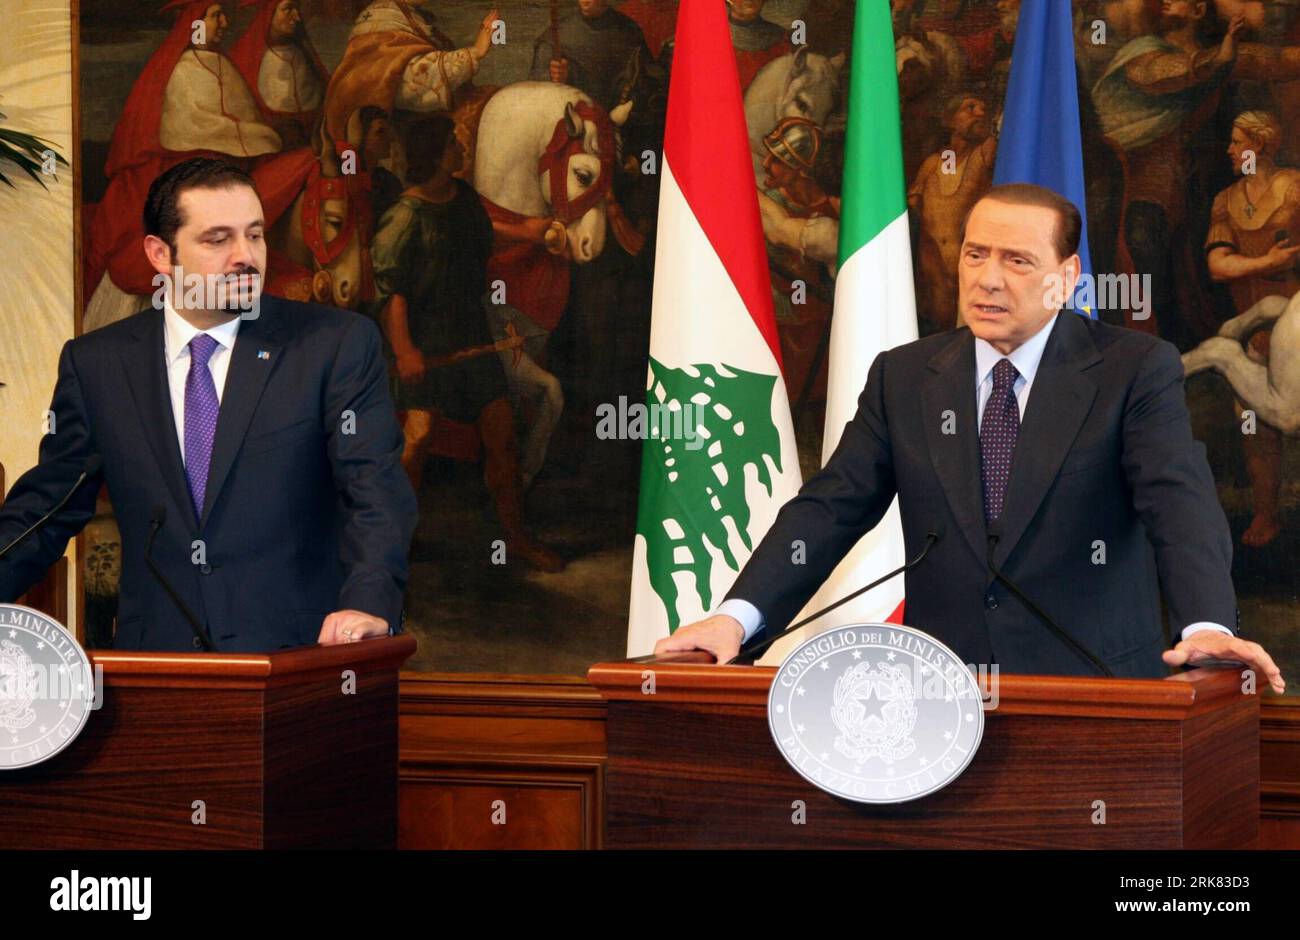 Bildnummer: 53961271  Datum: 20.04.2010  Copyright: imago/Xinhua (100421) -- ROME, April 21, 2010 (Xinhua) -- Italian Prime Minister Silvio Berlusconi (R) holds a joint press conference with Lebanon s Premier Saad Hariri in Rome, April 20, 2010. Berlusconi on Tuesday promised to help increase the European Union s role in Lebanon and in the peace negotiations between Israel and Palestine. (Xinhua/Wang Xingqiao)(zx) (1)ITALY-LEBANON-PRESS CONFERENCE PUBLICATIONxNOTxINxCHN People Politik premiumd xint kbdig xsk 2010 quer     Bildnummer 53961271 Date 20 04 2010 Copyright Imago XINHUA  Rome April 2 Stock Photo